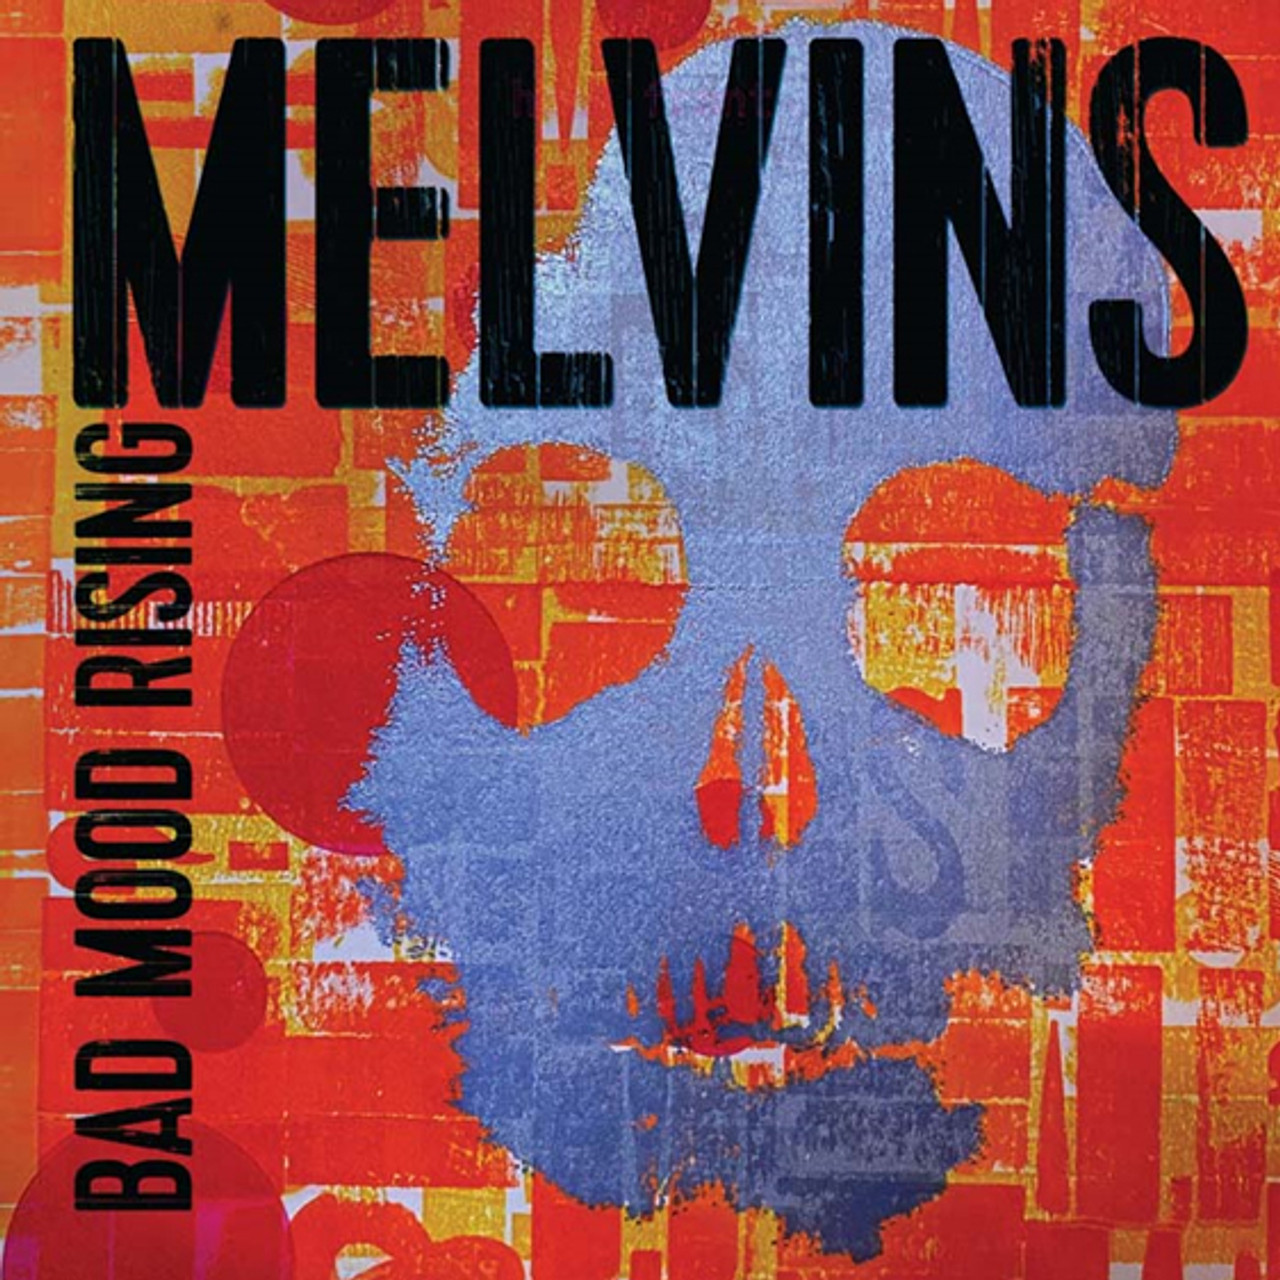 Artwork for the album ‘Bad Moon Rising’ by the Melvins